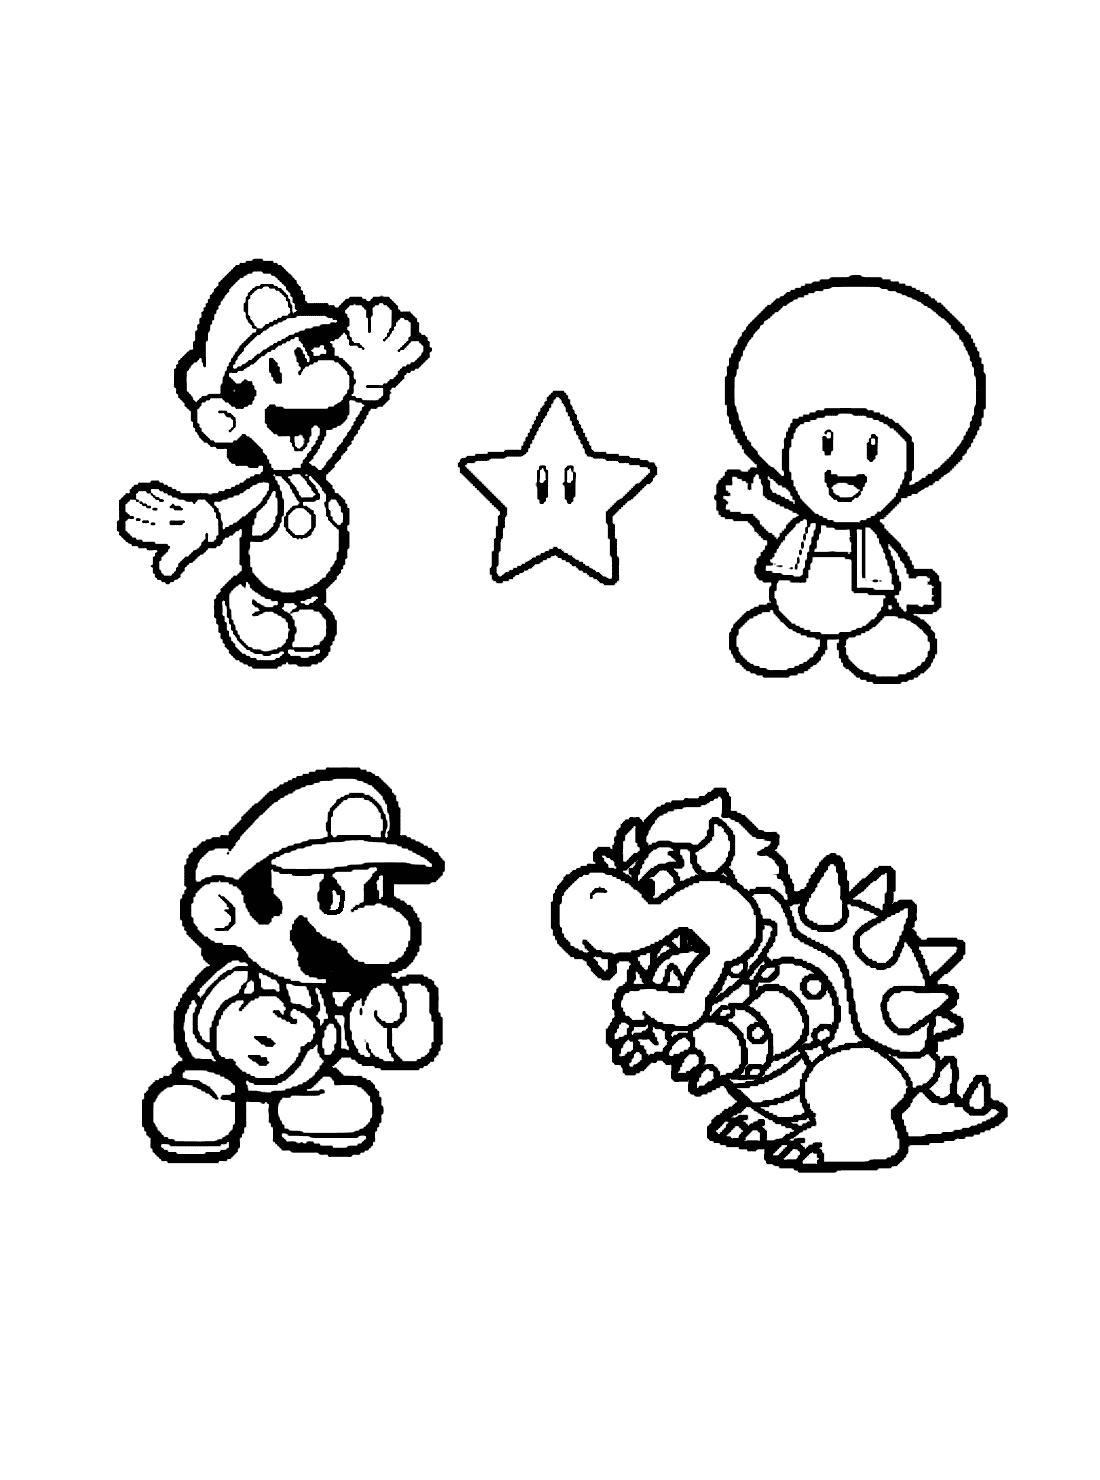 Super Mario Characters - Coloring Online Free